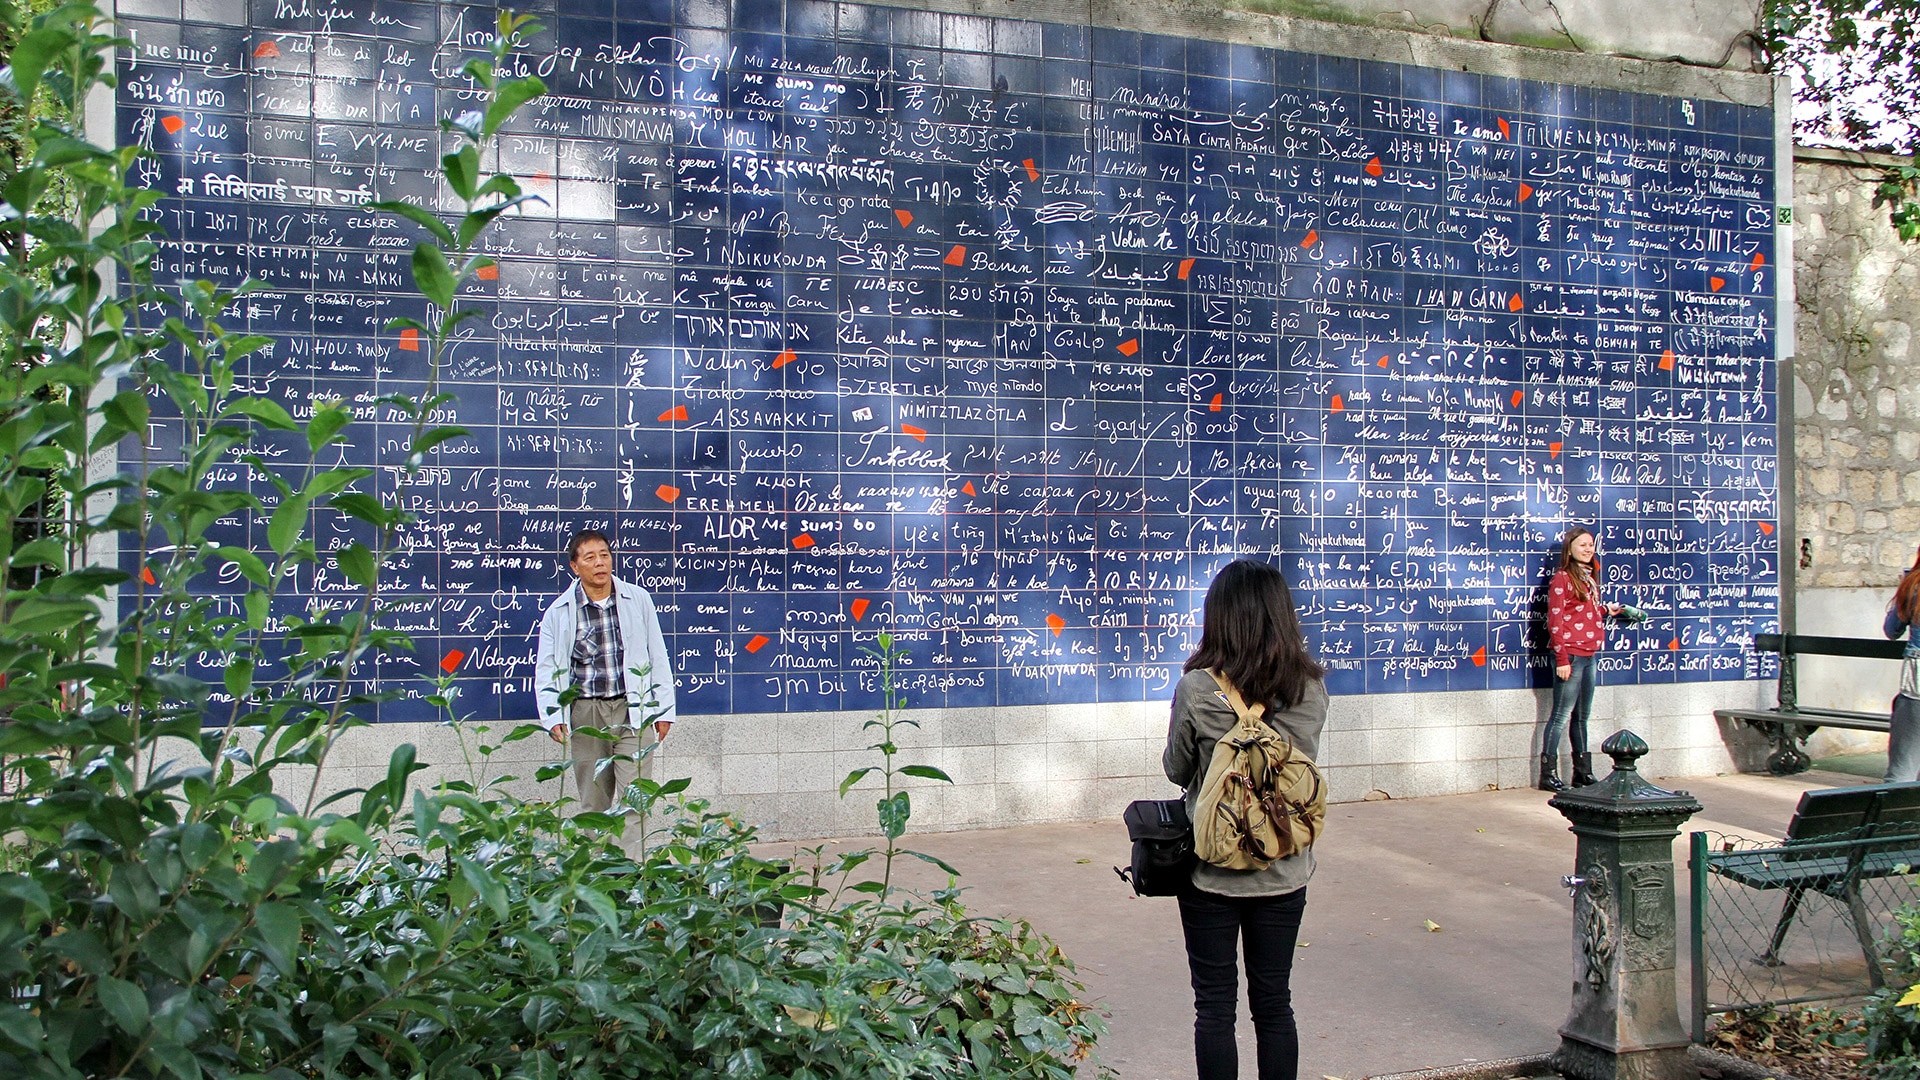 The Wall of Love, Paris, France